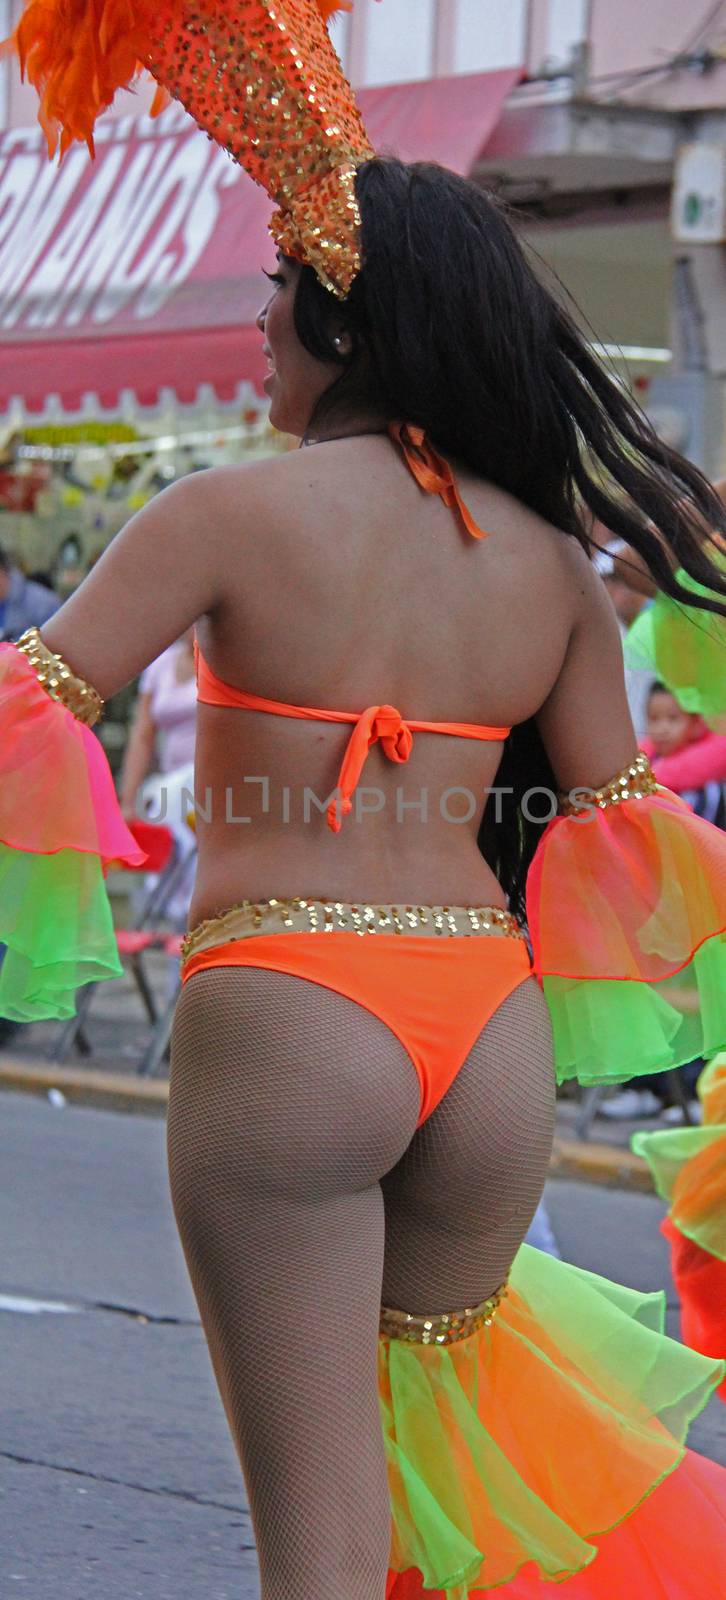 A dancer performing at a parade during a carnaval in Veracruz, Mexico 03 Feb 2016 No model release Editorial use only